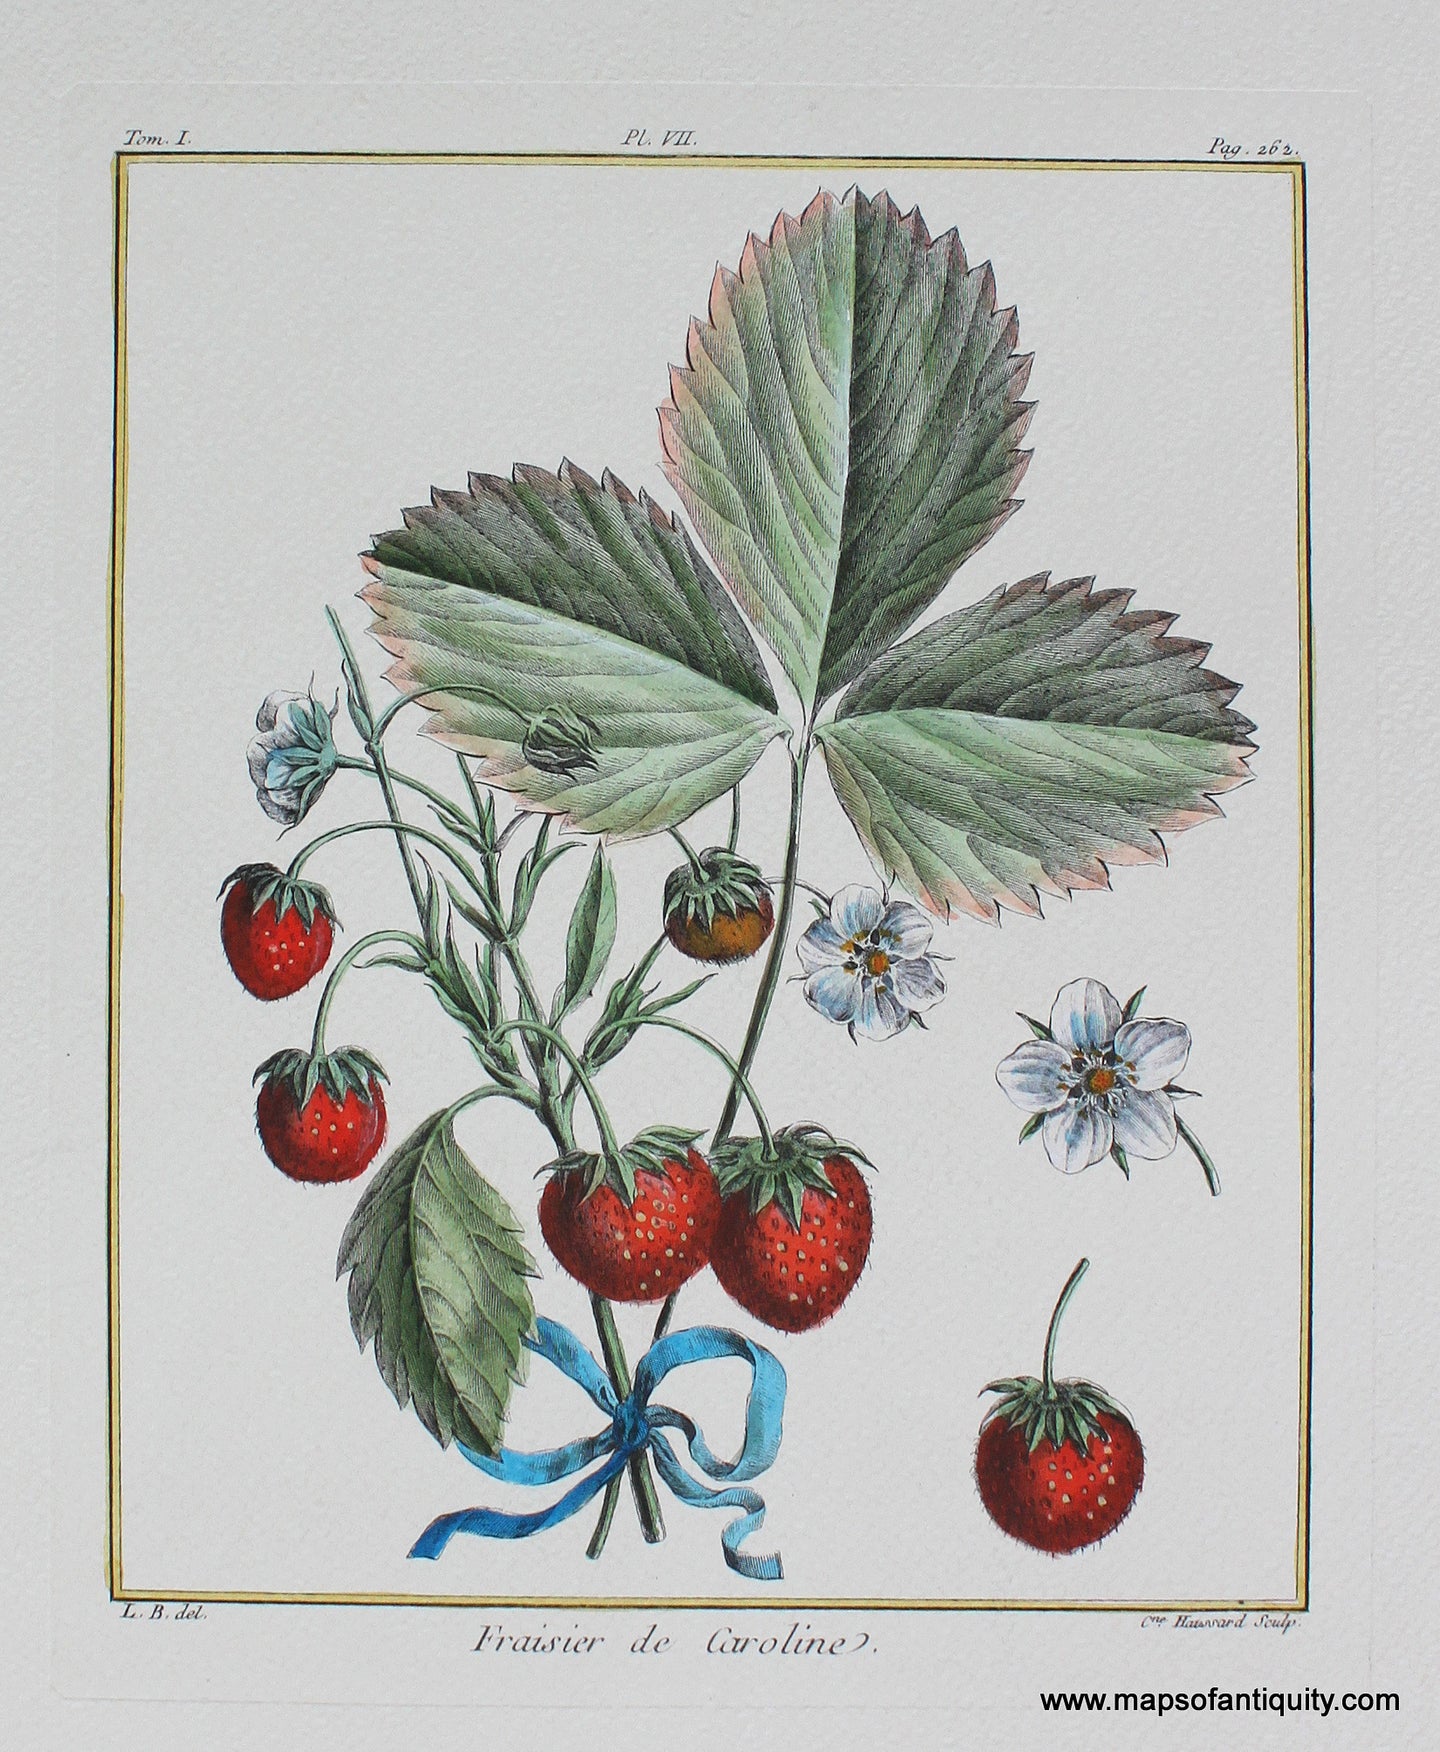 Digitally-Engraved-Specialty-Reproductions-Fraisier-de-Caroline-Strawberry-Strawberries-Fruit-Berry-Berries-Botanical-Print-Prints-Maps-of-Antiquity